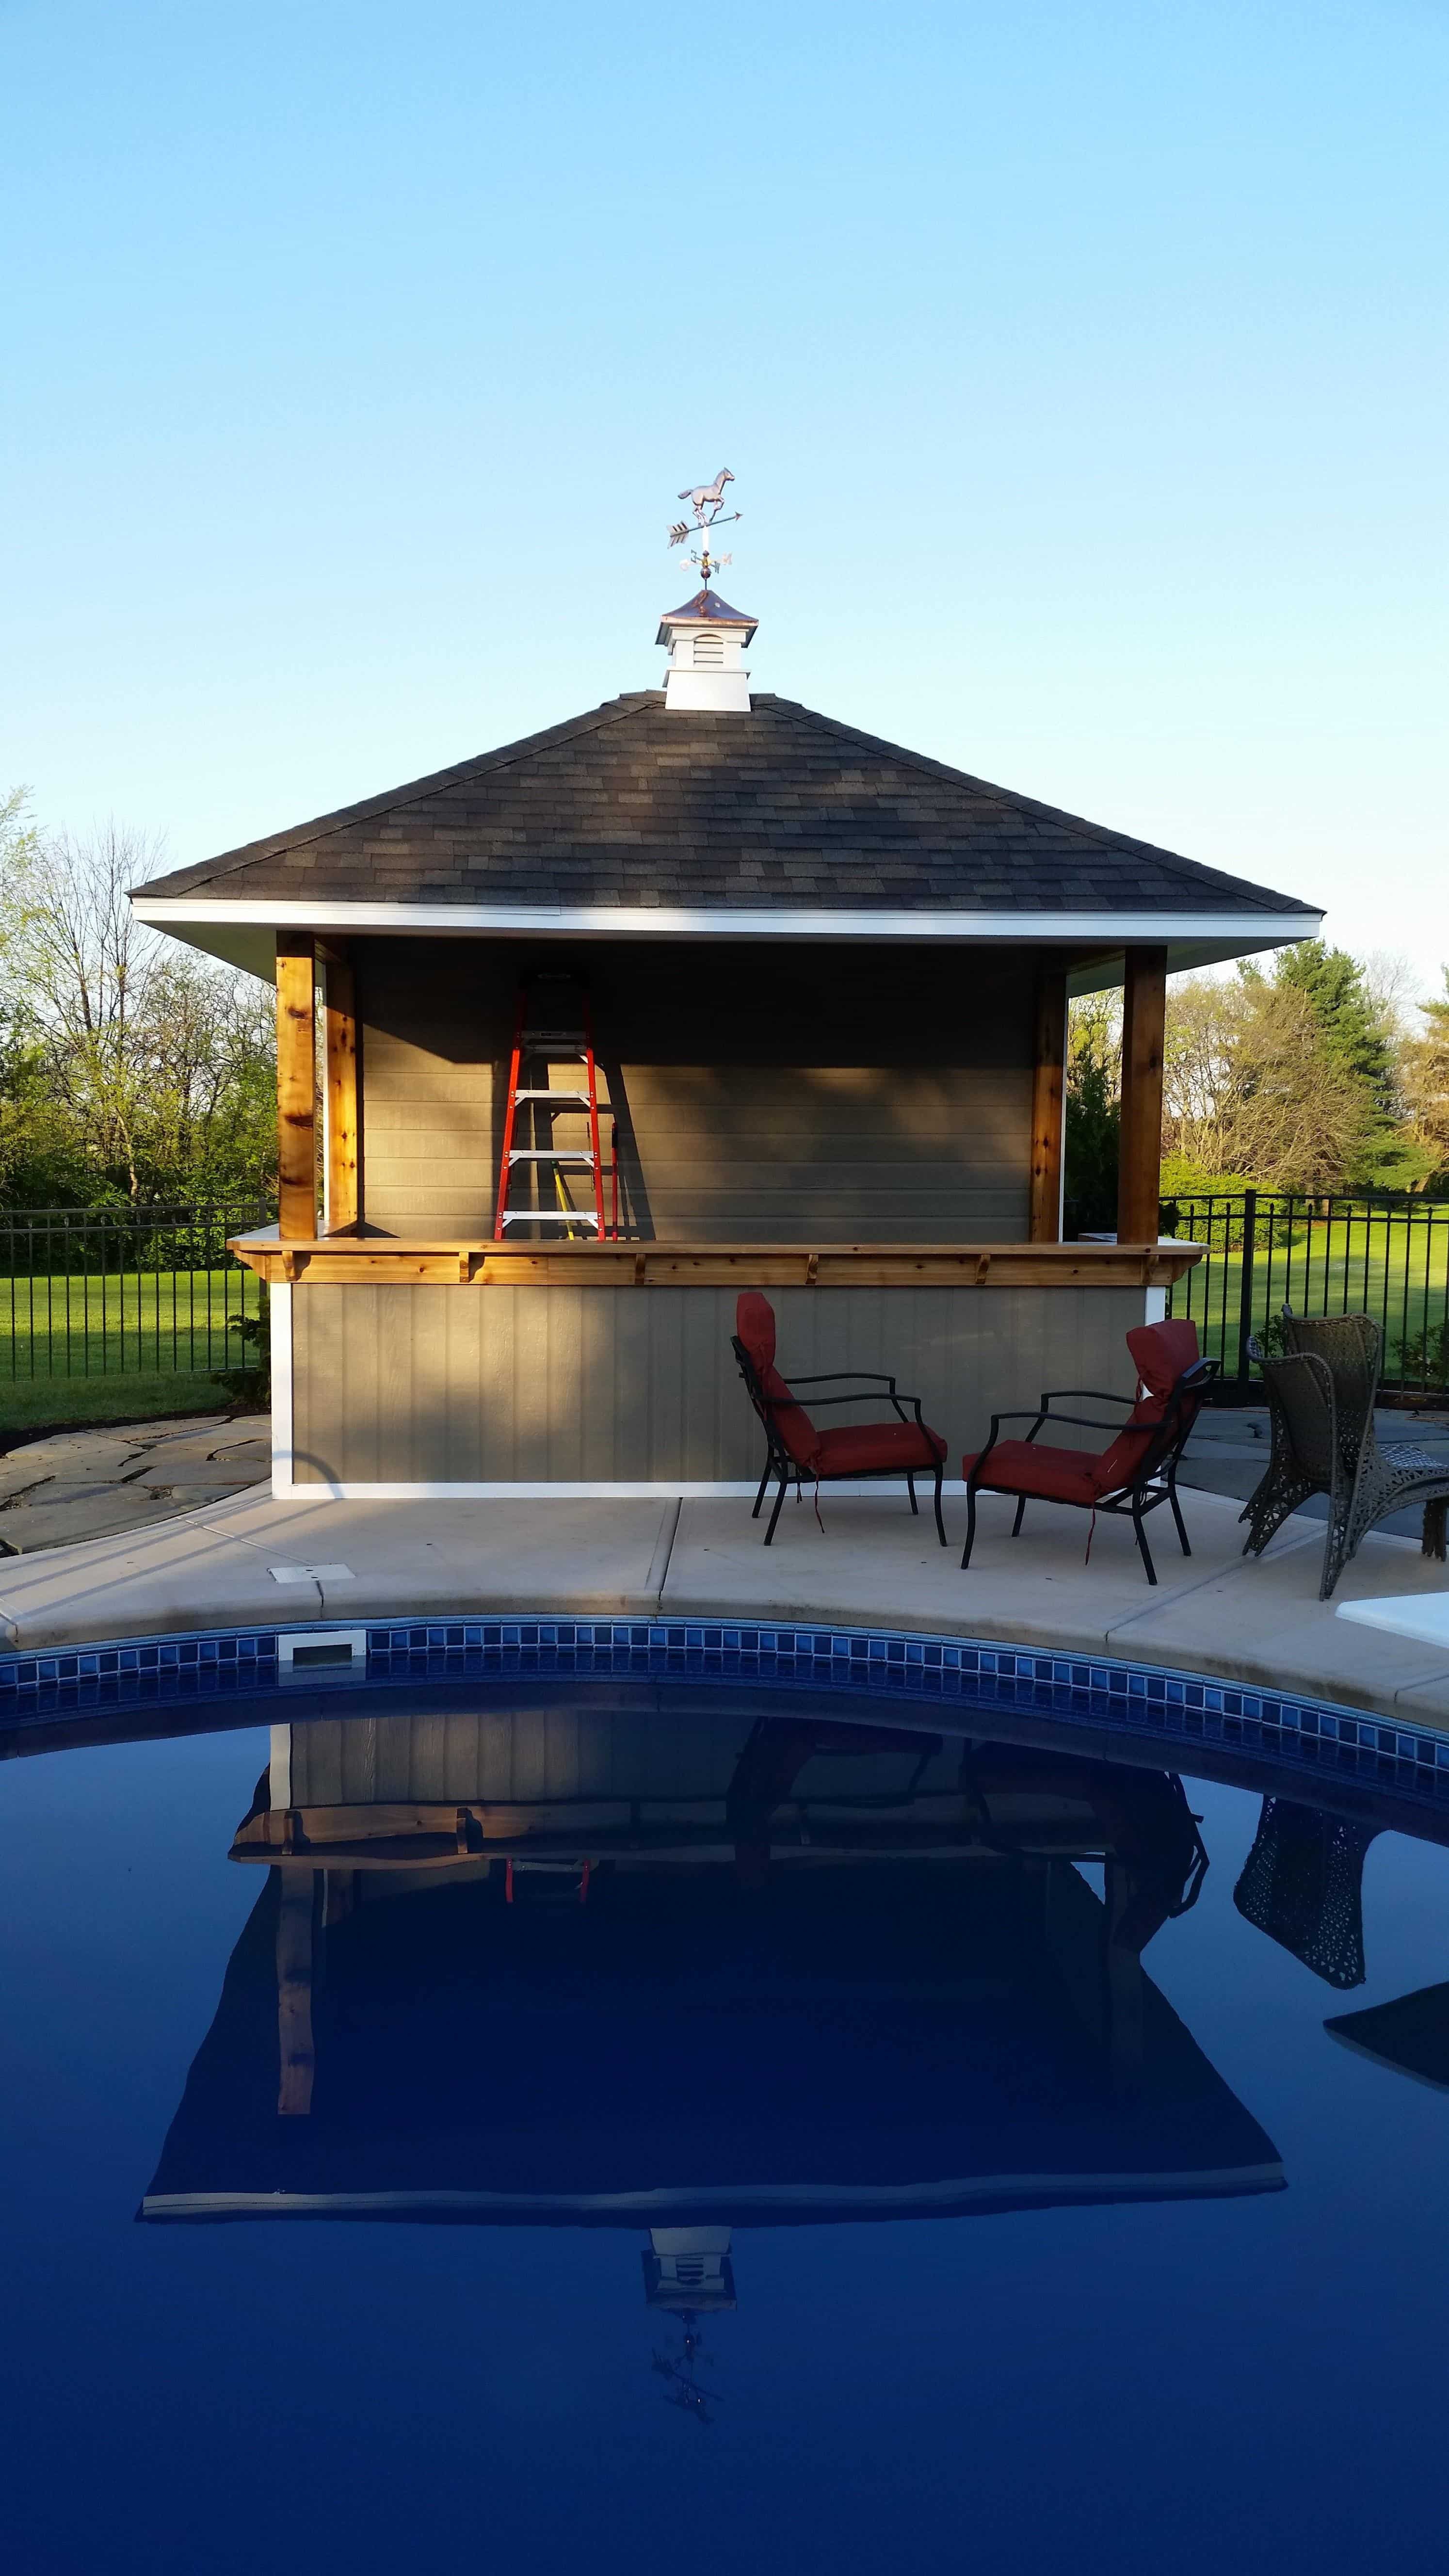 Barside pool cabana 10x12 with Vinyl curved cupola in Lebanon Ohio. ID number 194252-2.